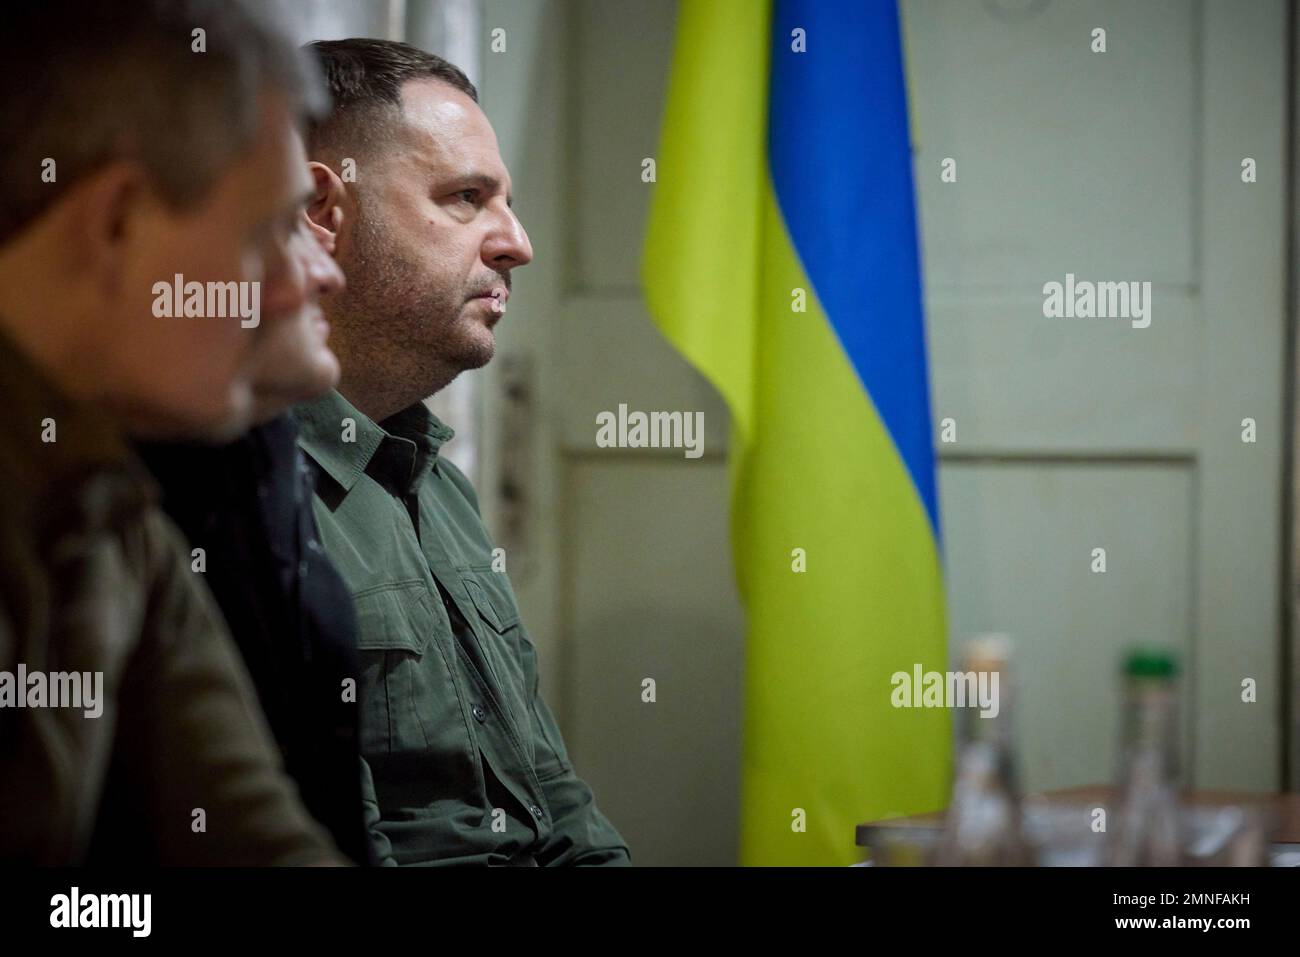 Mykolaiv, Ukraine. 30th Jan, 2023. Ukrainian chief of presidential staff Andrii Yermak listens during a briefing on the situation in the Black Sea city of Mykolaiv near the frontlines 30kms from Russian troops, January 30, 2023 in Mykolaiv, Ukraine. Credit: Ukraine Presidency/Ukrainian Presidential Press Office/Alamy Live News Stock Photo